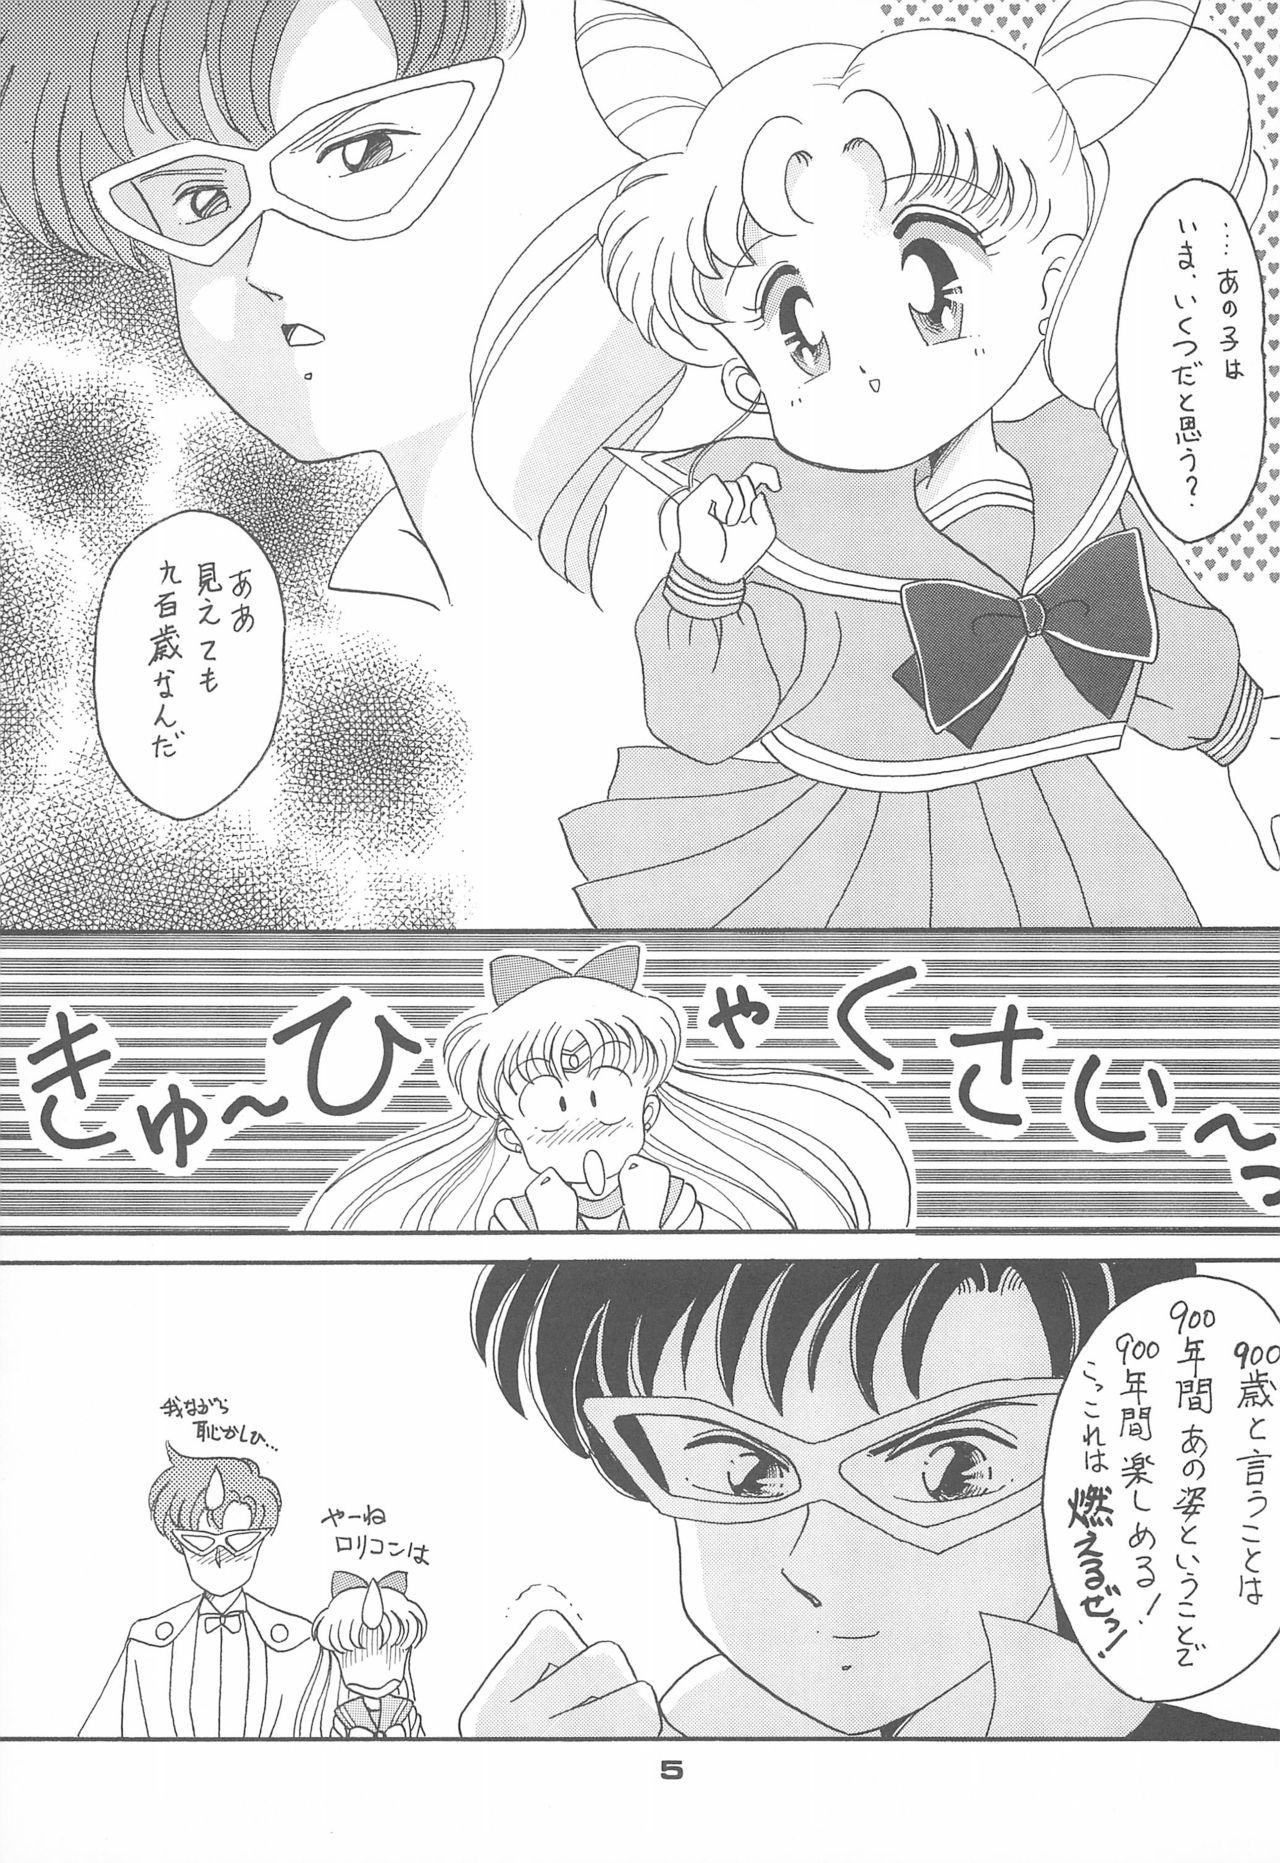 Femdom Clips Ponponpon 4 - Sailor moon Riding - Page 7